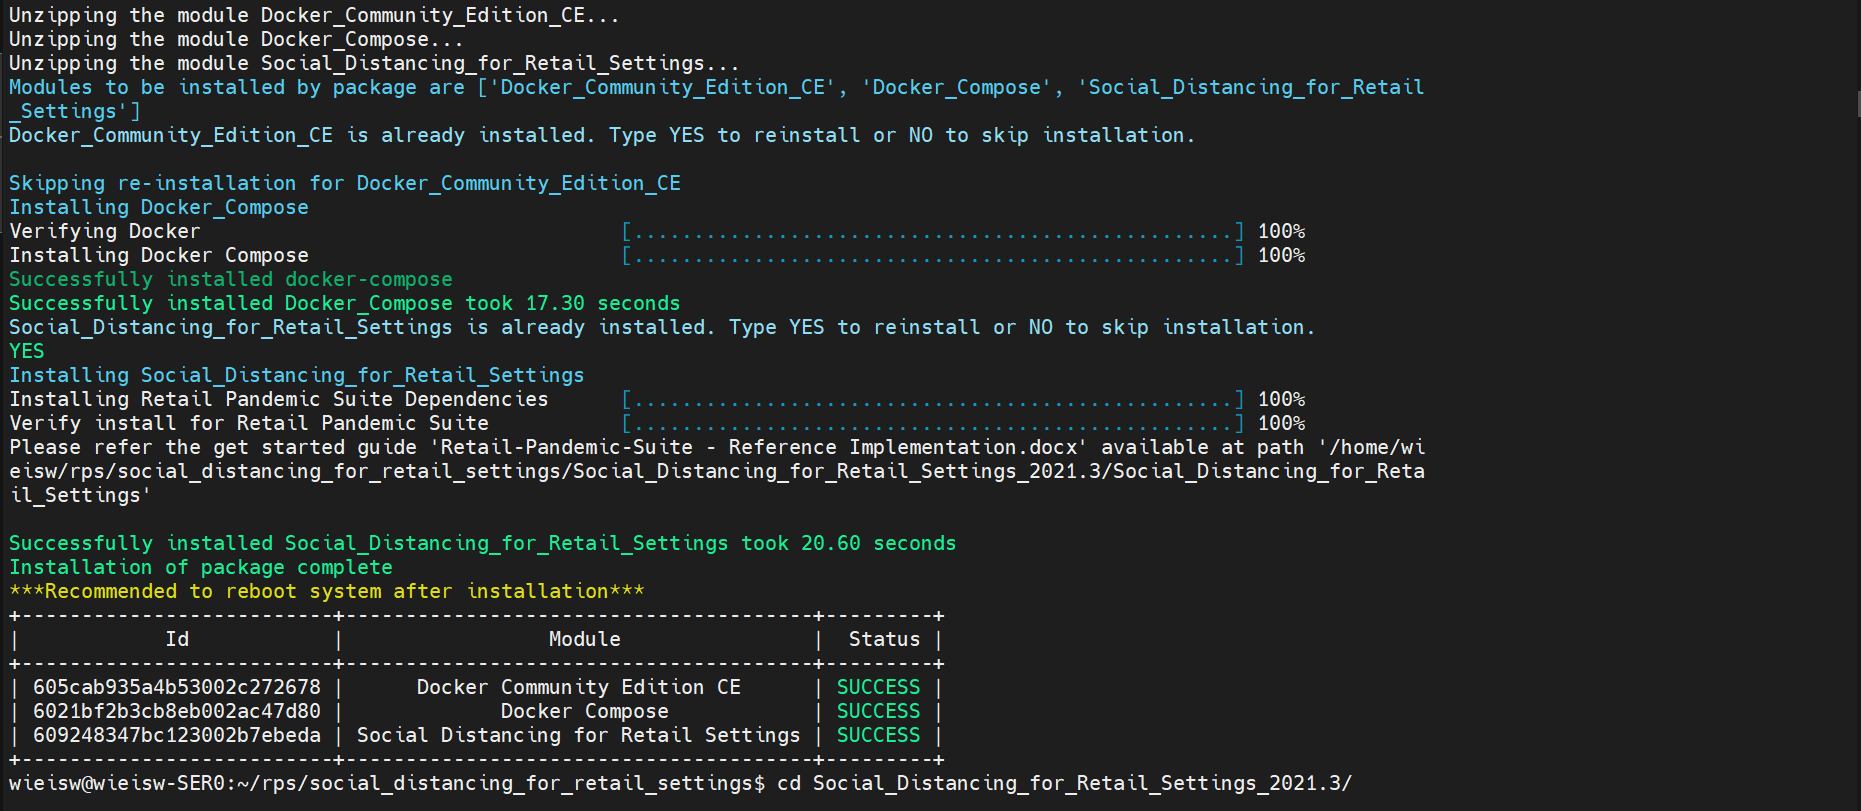 Screenshot of terminal with text that shows different modules are being installed, and then it says “Installation of package complete. Recommended to reboot system after installation.” A table lists all the modules, their IDs, and their status as “success.” 